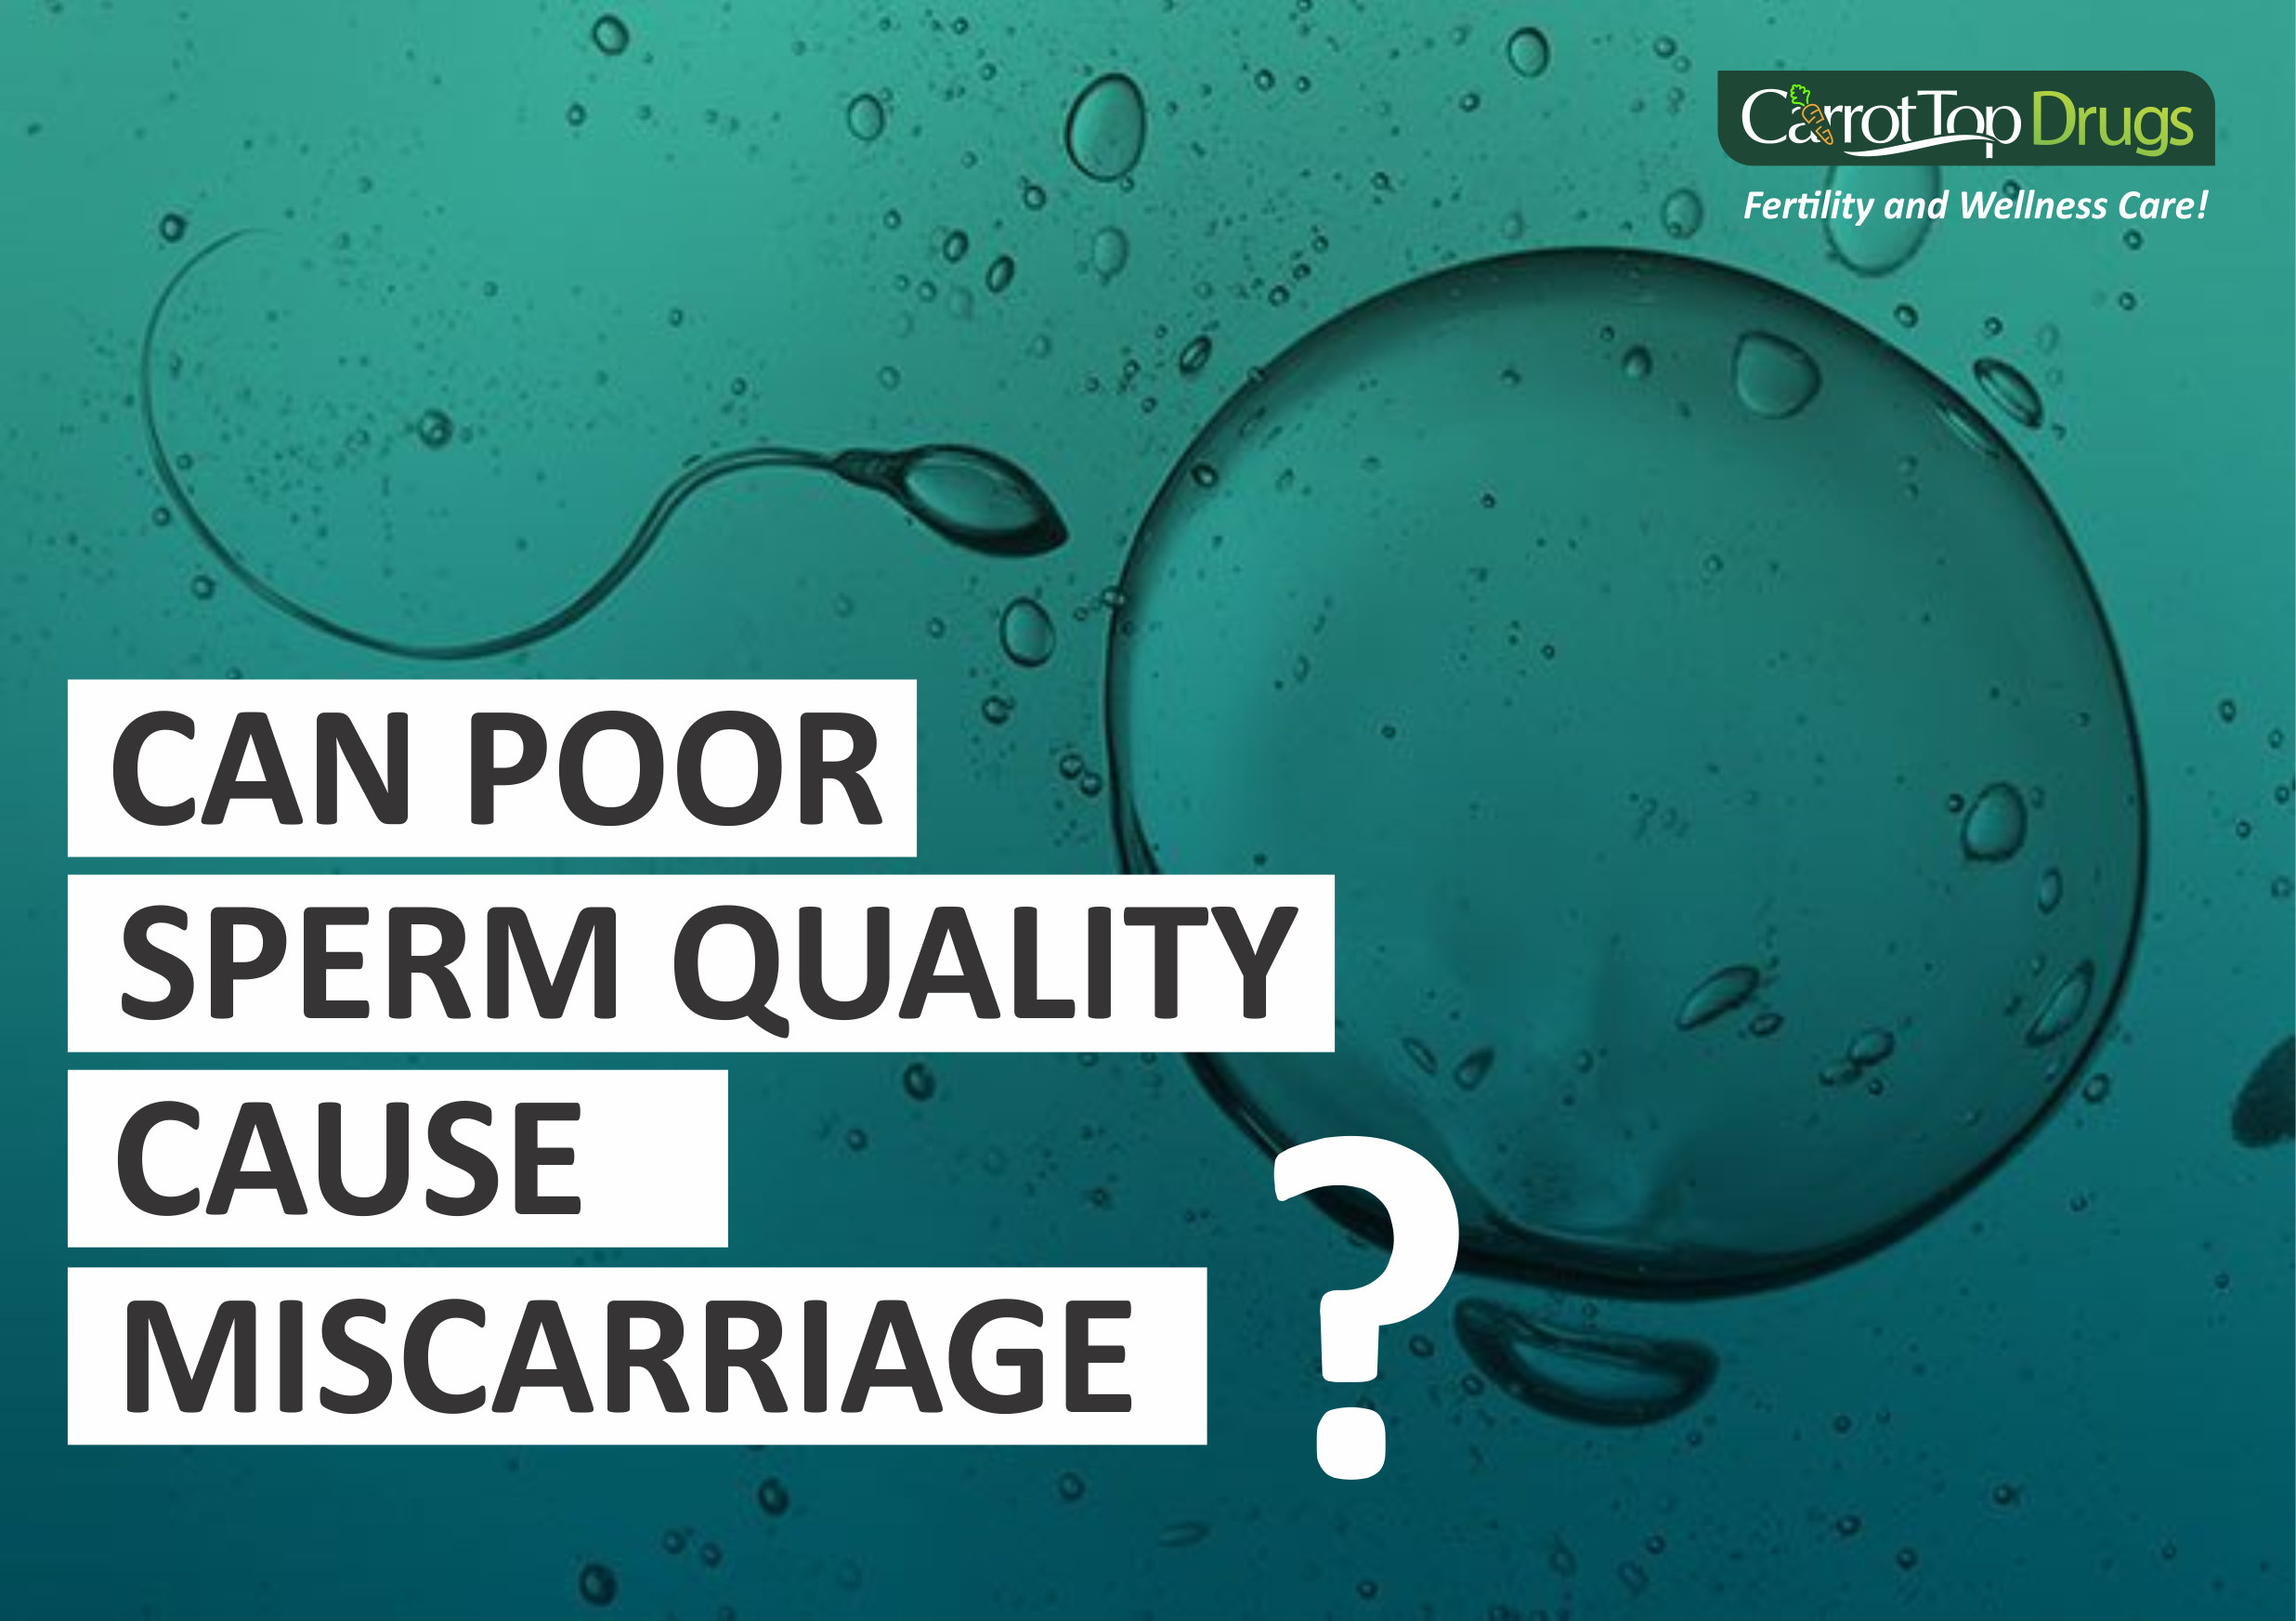 can_poor_sperm_quality_cause_miscarriage?